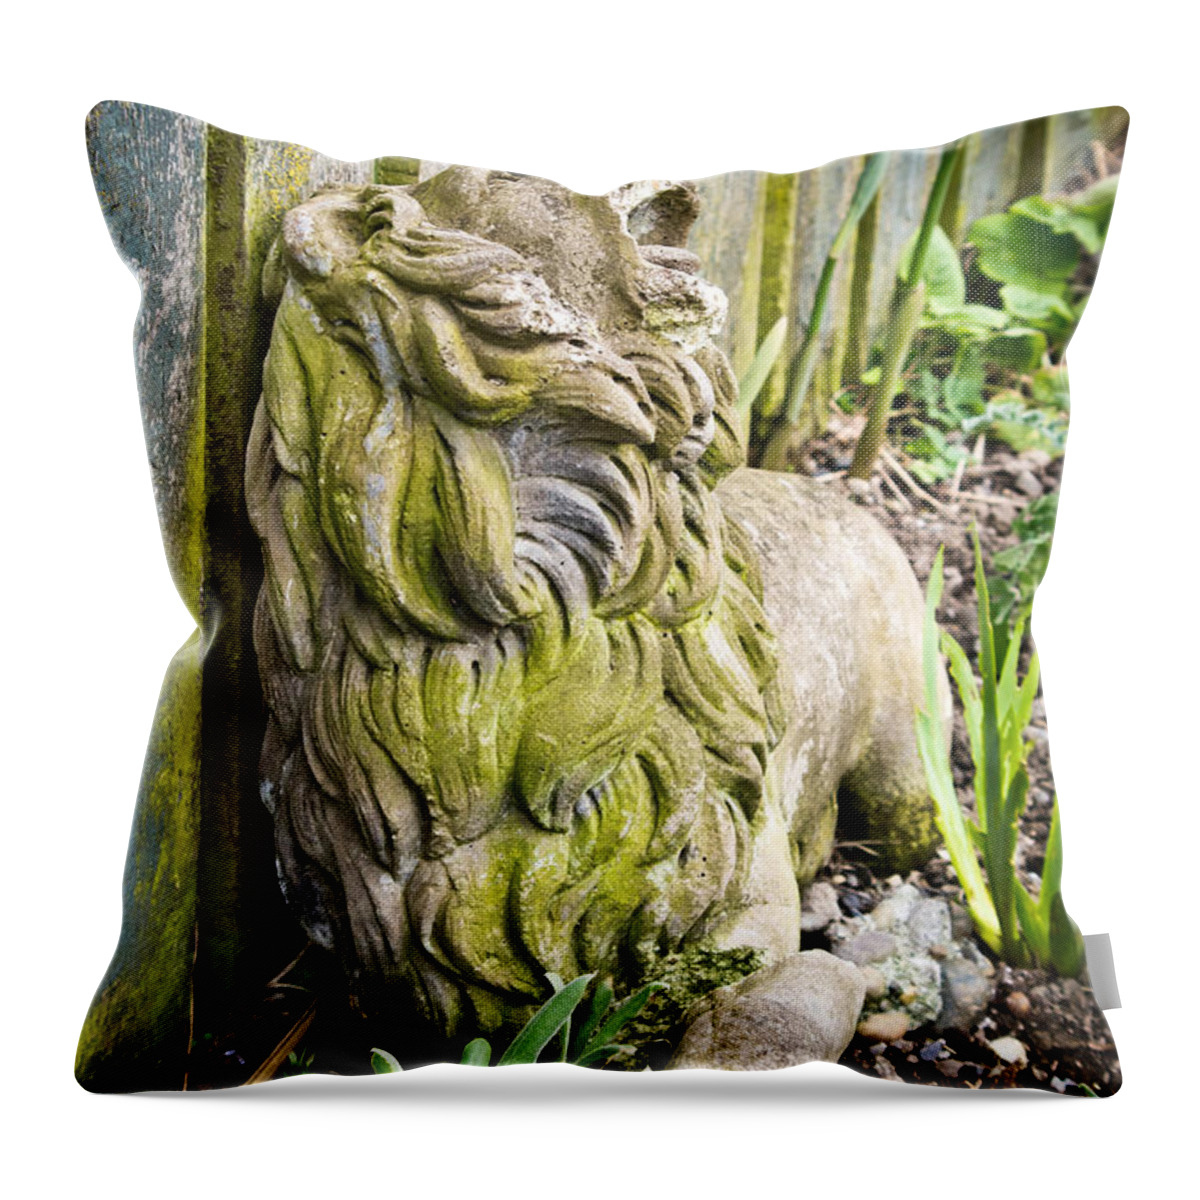 Lion Throw Pillow featuring the photograph Weathered Lion by Priya Ghose